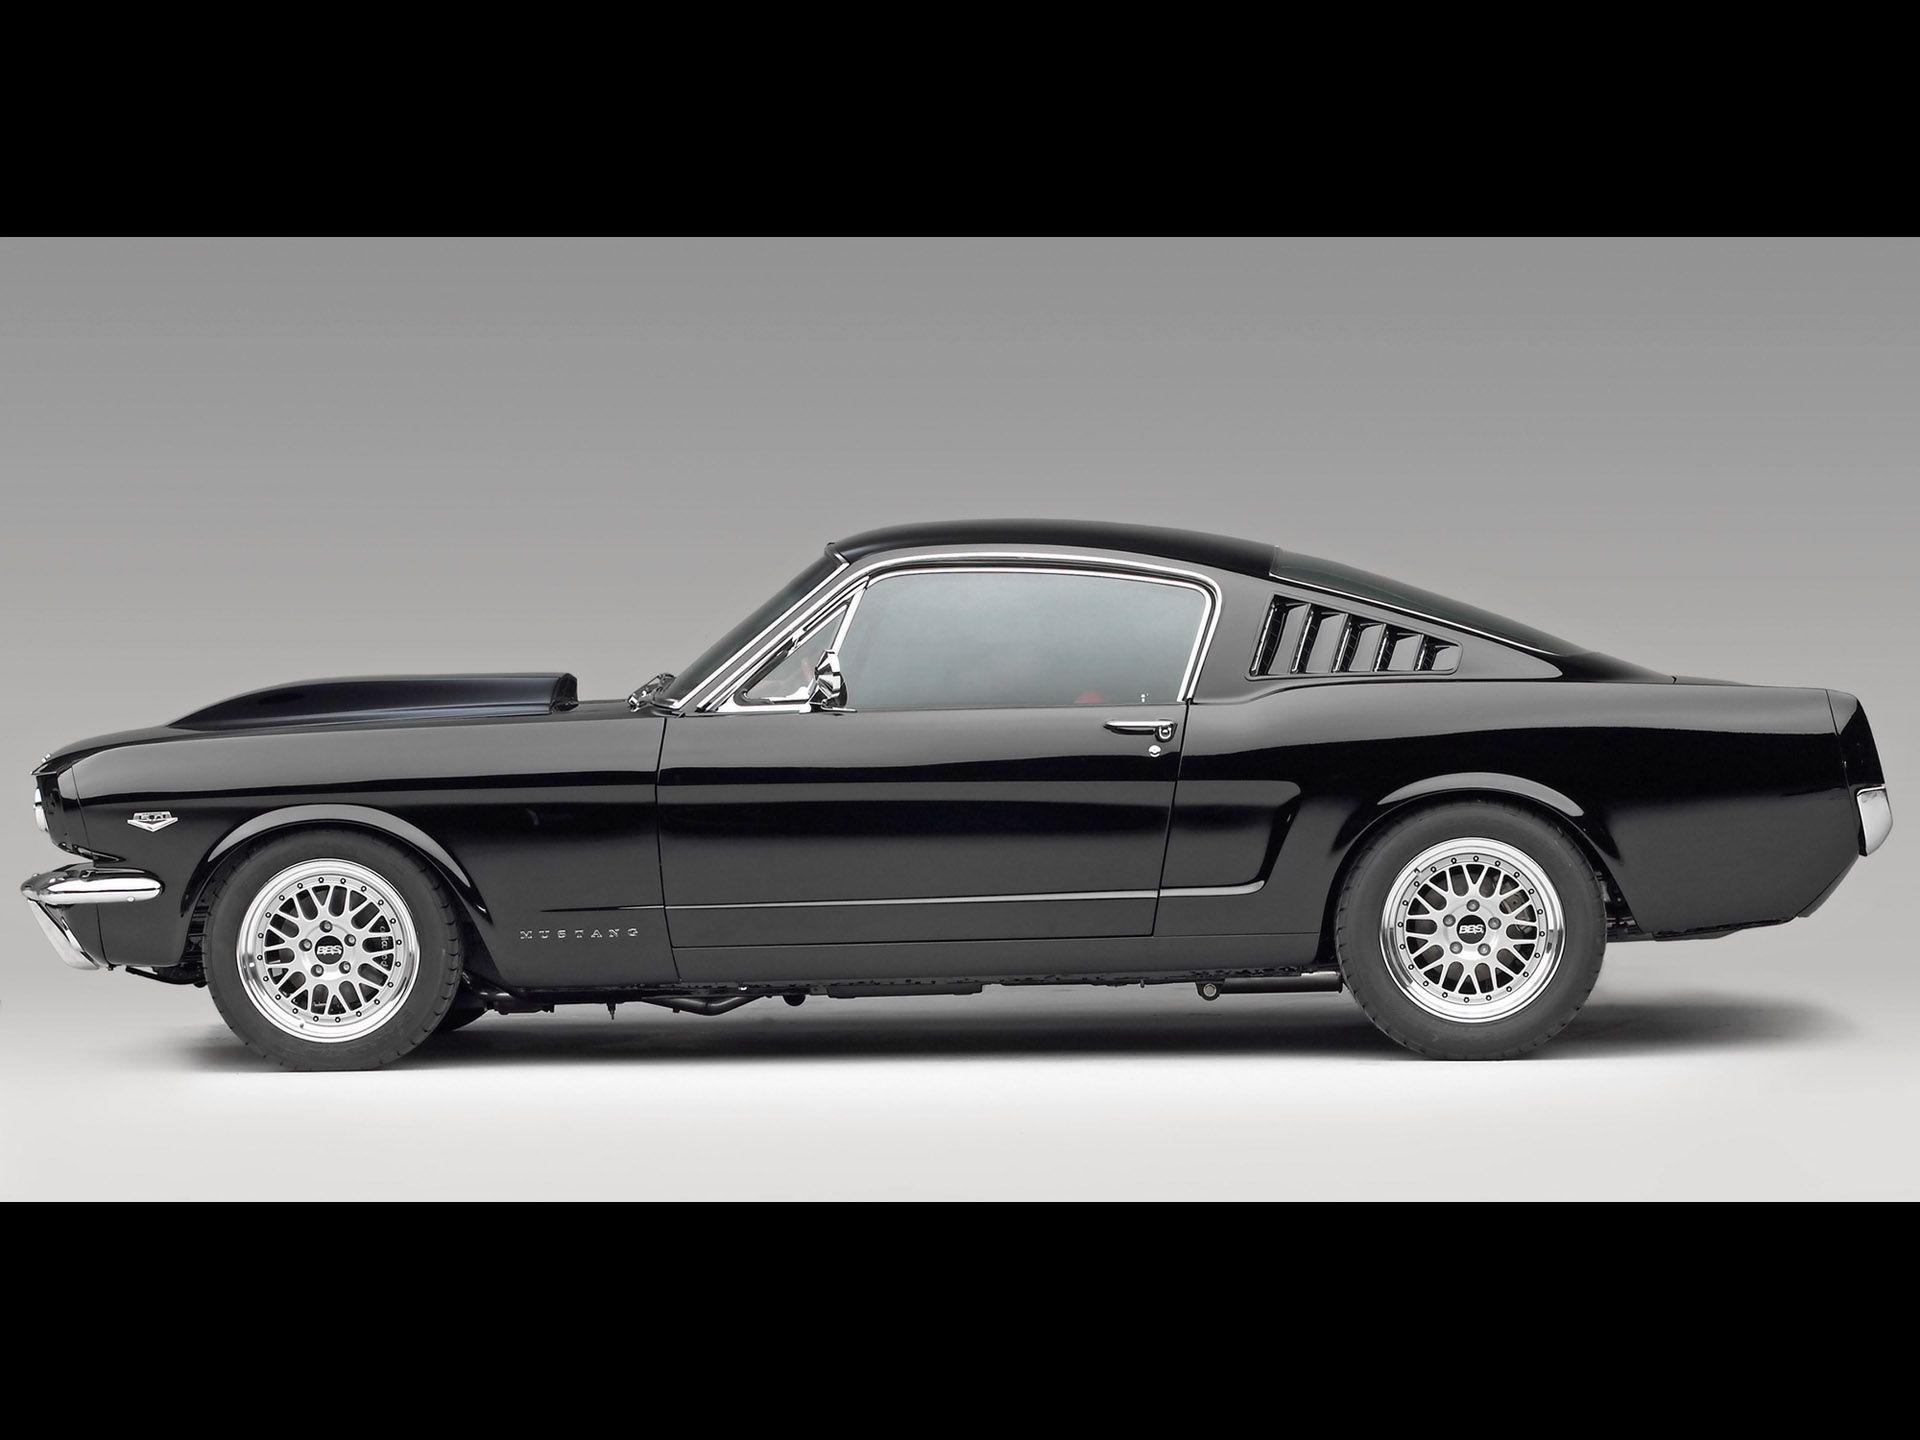 1965 Ford Mustang Cammer - Side - 1920x1440 Wallpaper